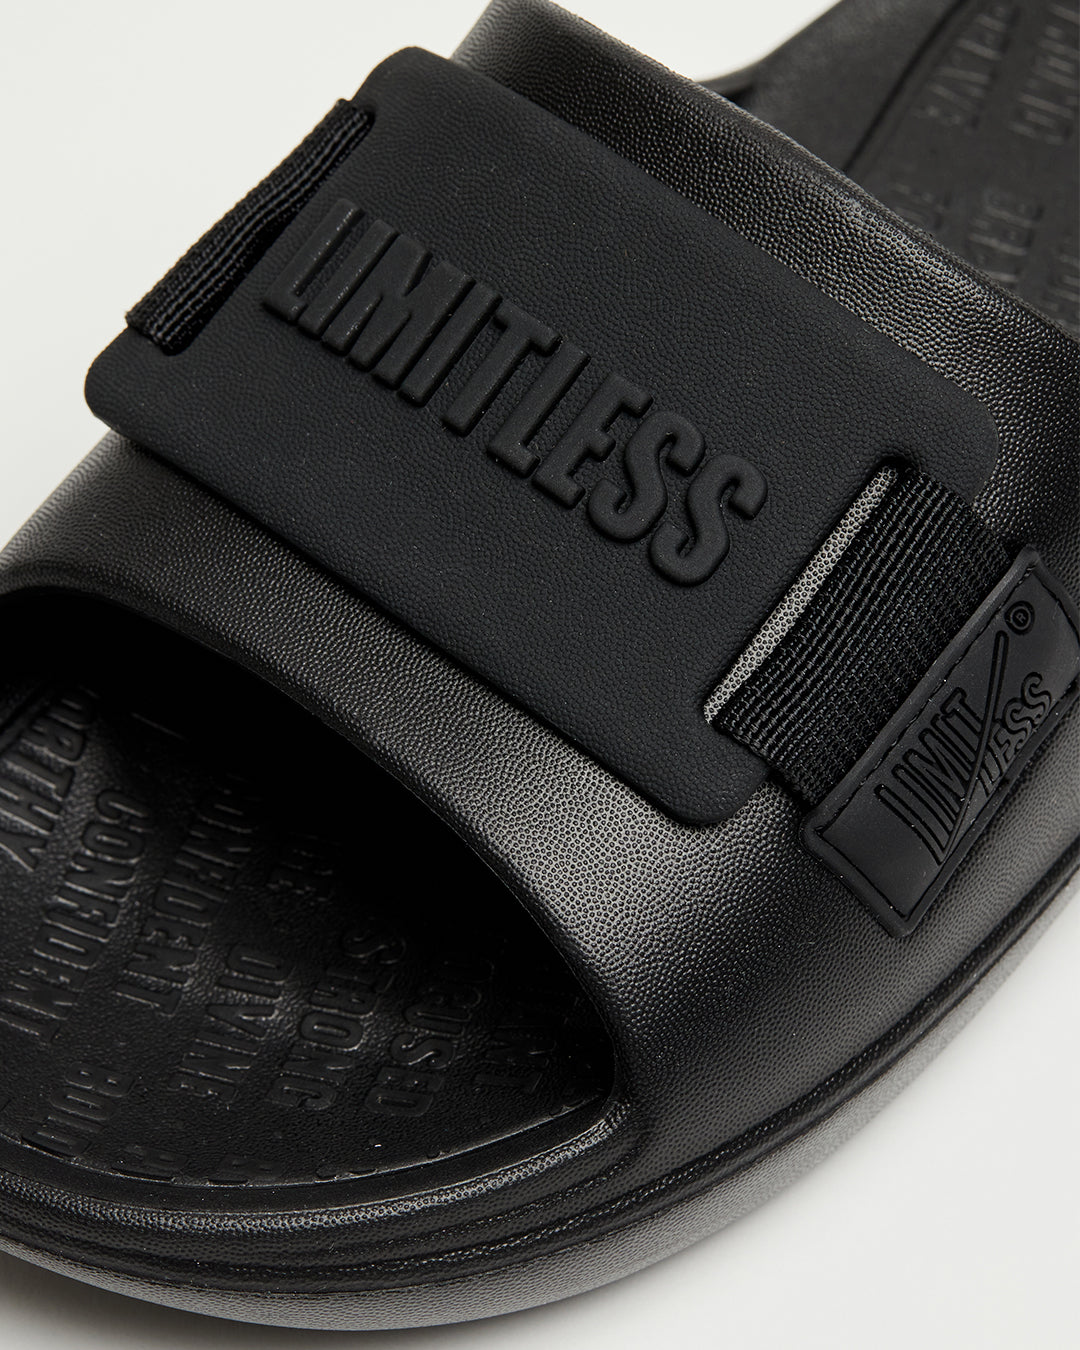 LIMITLESS SLIDES™ WITH ESSENTIAL TIBAH™ QUAD - SOMERSET ACADEMY STARLETTES EDITION